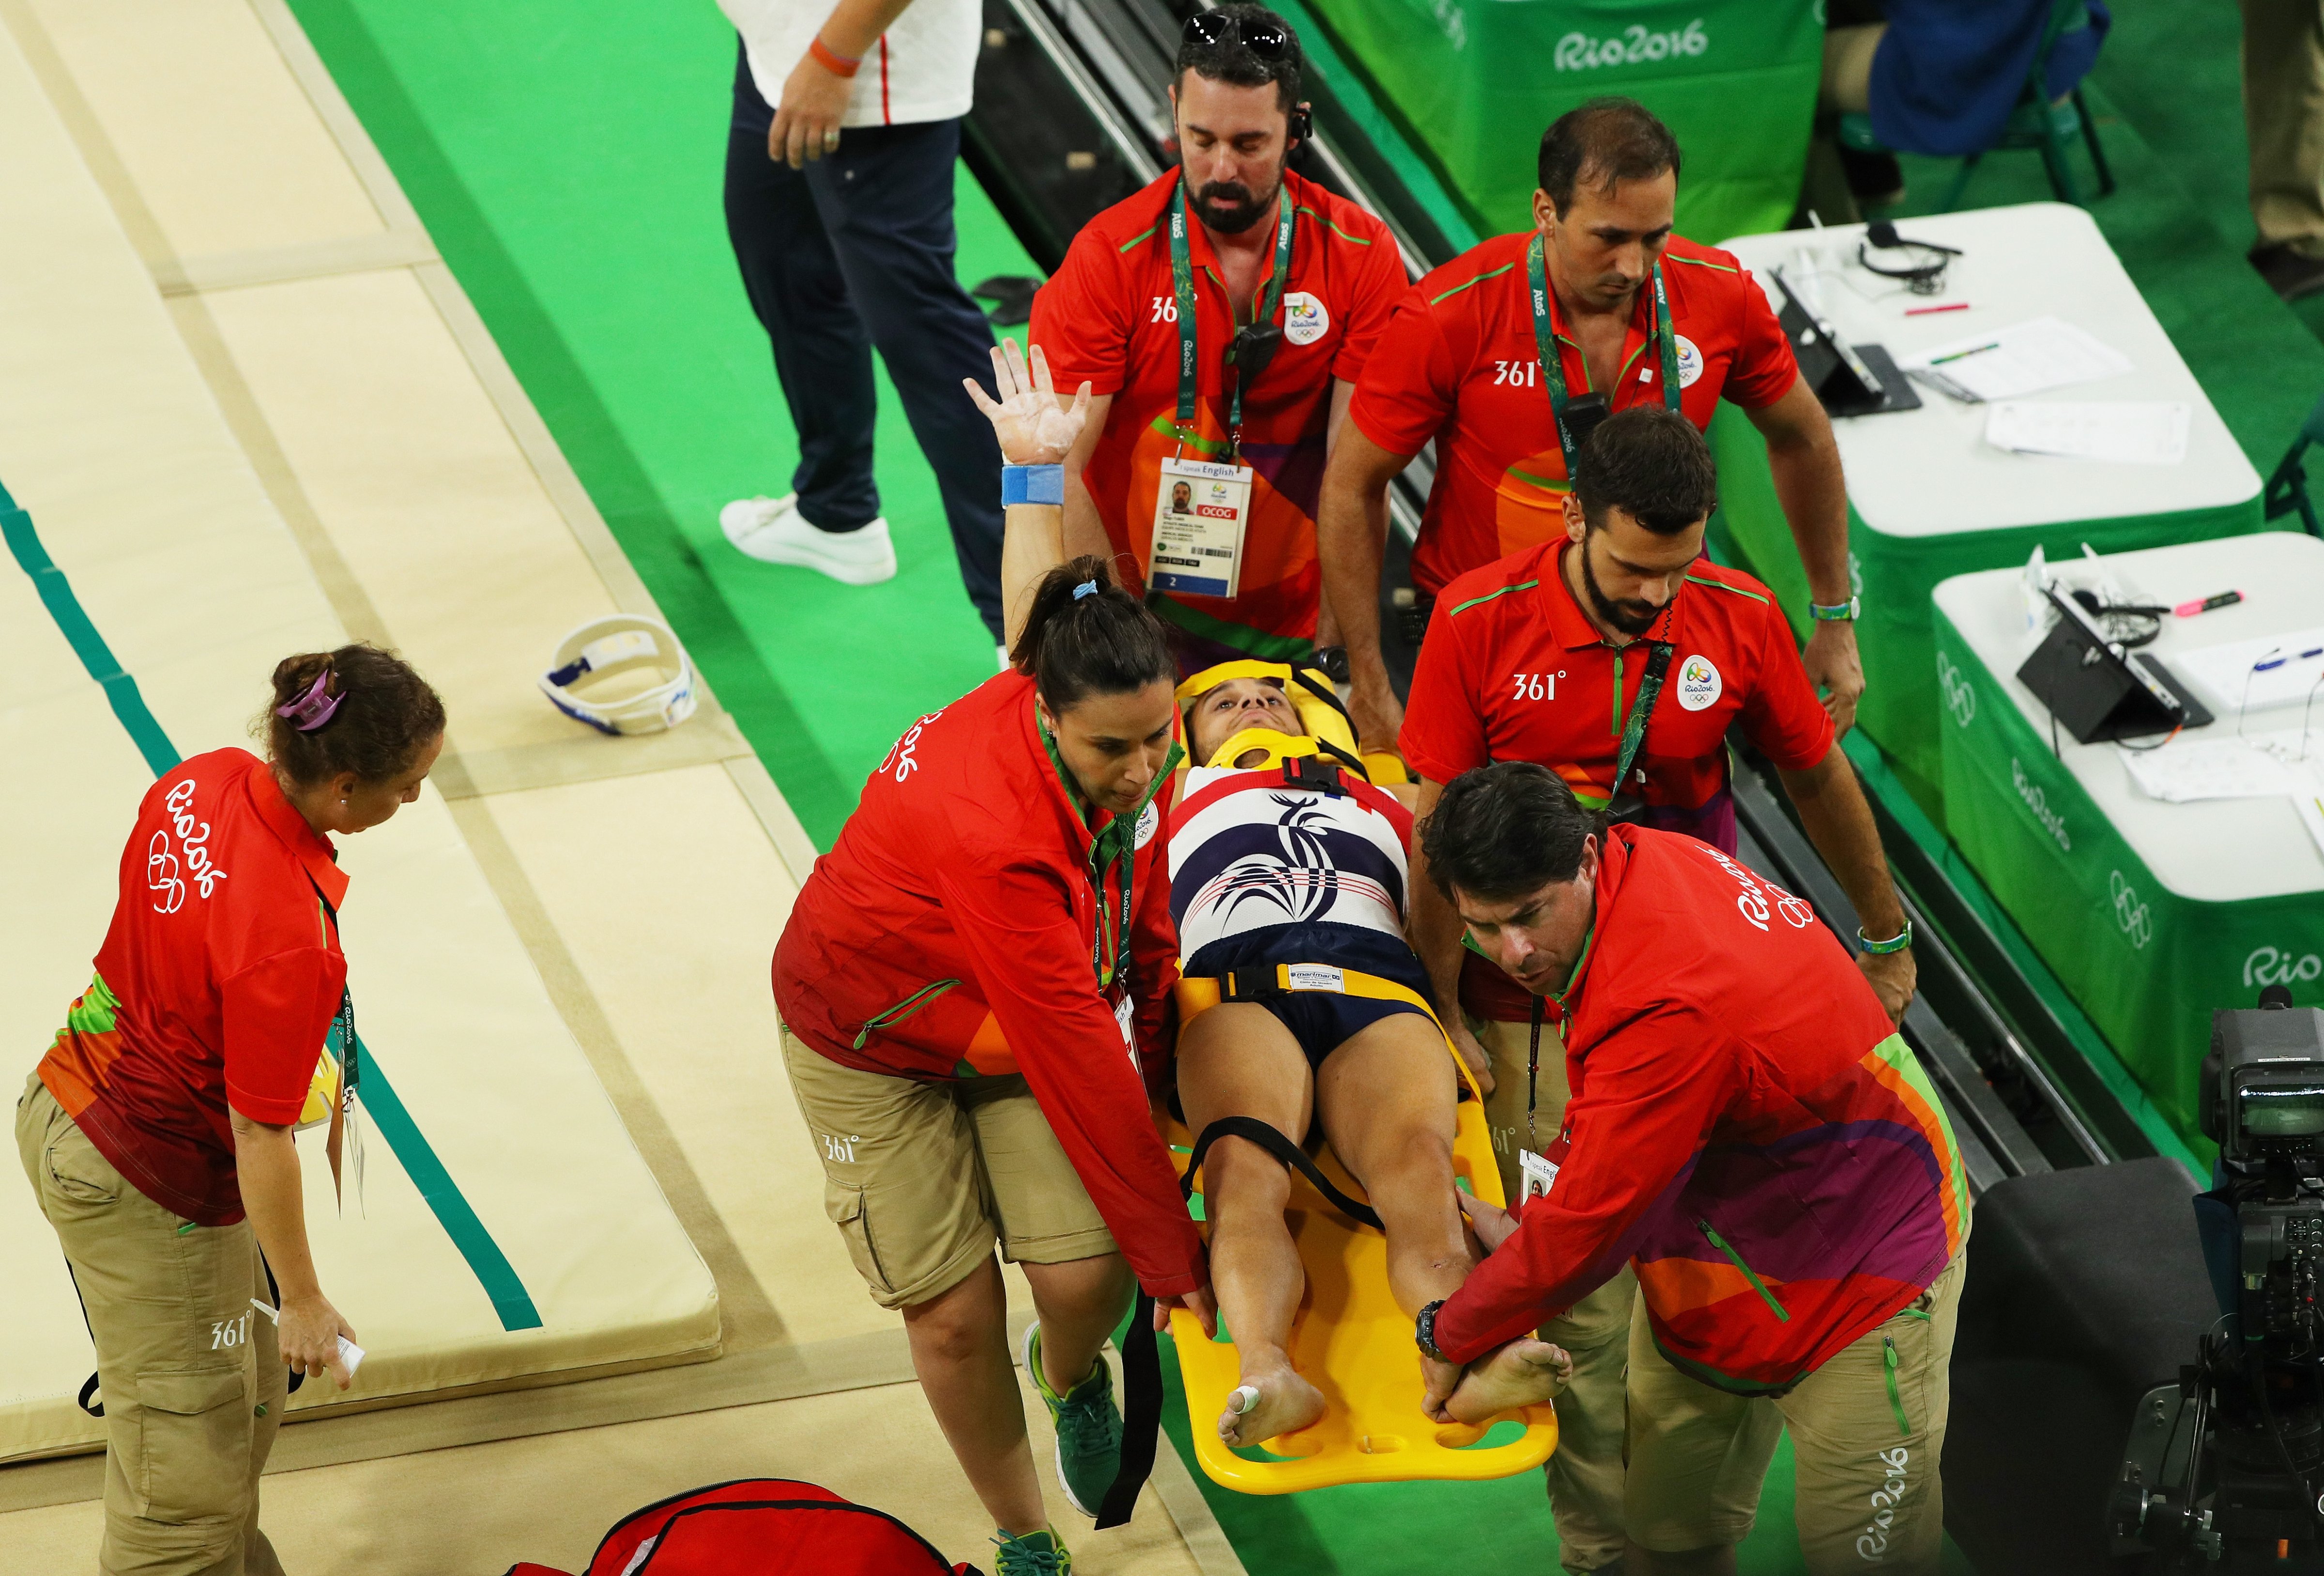 Samir Ait Said of France receives medical attention during the Gymnastics Men's Team qualification on Day 1 of the Rio 2016 Olympic Games on August 6, 2016. (Scott Halleran&mdash;Getty Images)